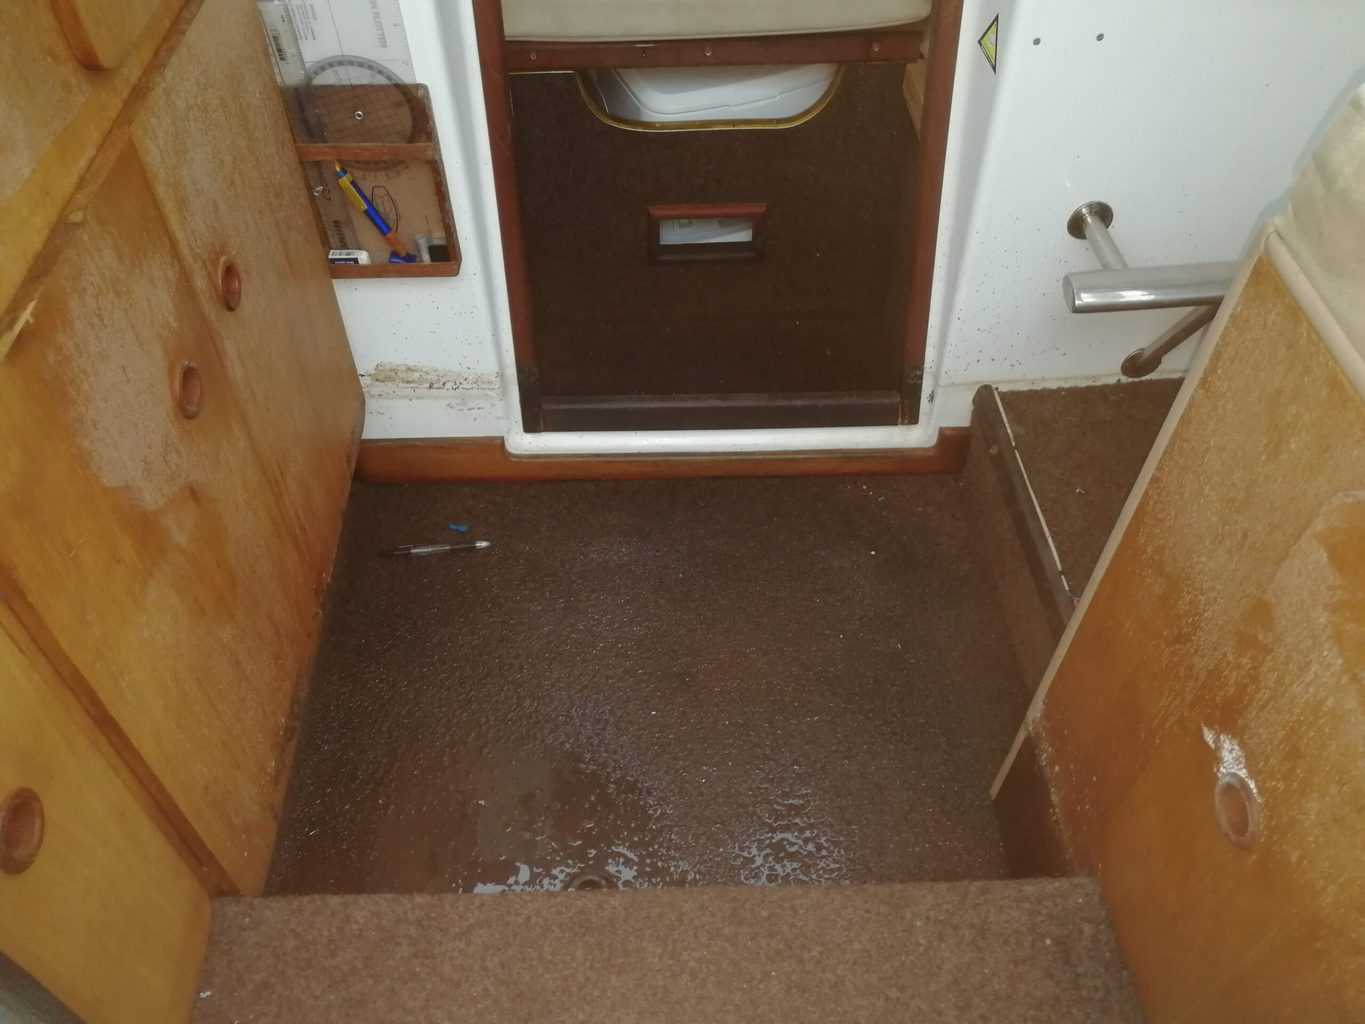 A water logged carpet.